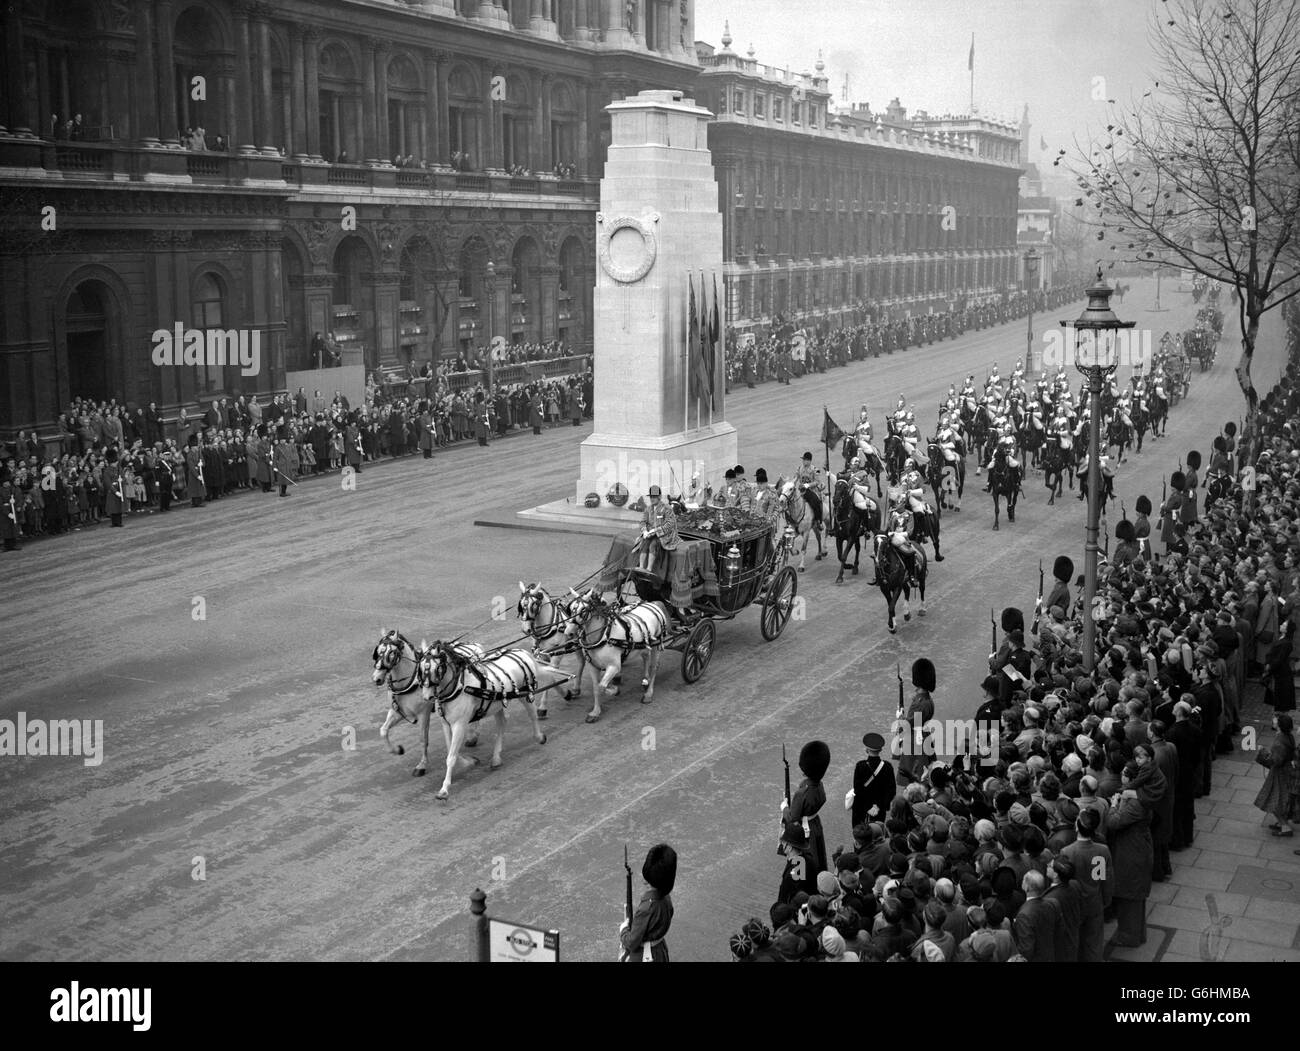 The Irish State coach passes the Cenotaph in Whitehall during the Royal drive to Westminster where the Queen, accompanied by the Duke of Edinburgh, opened Parliament for the first time in her reign. Riding with the Duke in the Irish State coach, the Queen drove in procession from Buckingham Palace to the House of Lords, returning in procession after making the traditional speech from the Throne. Stock Photo